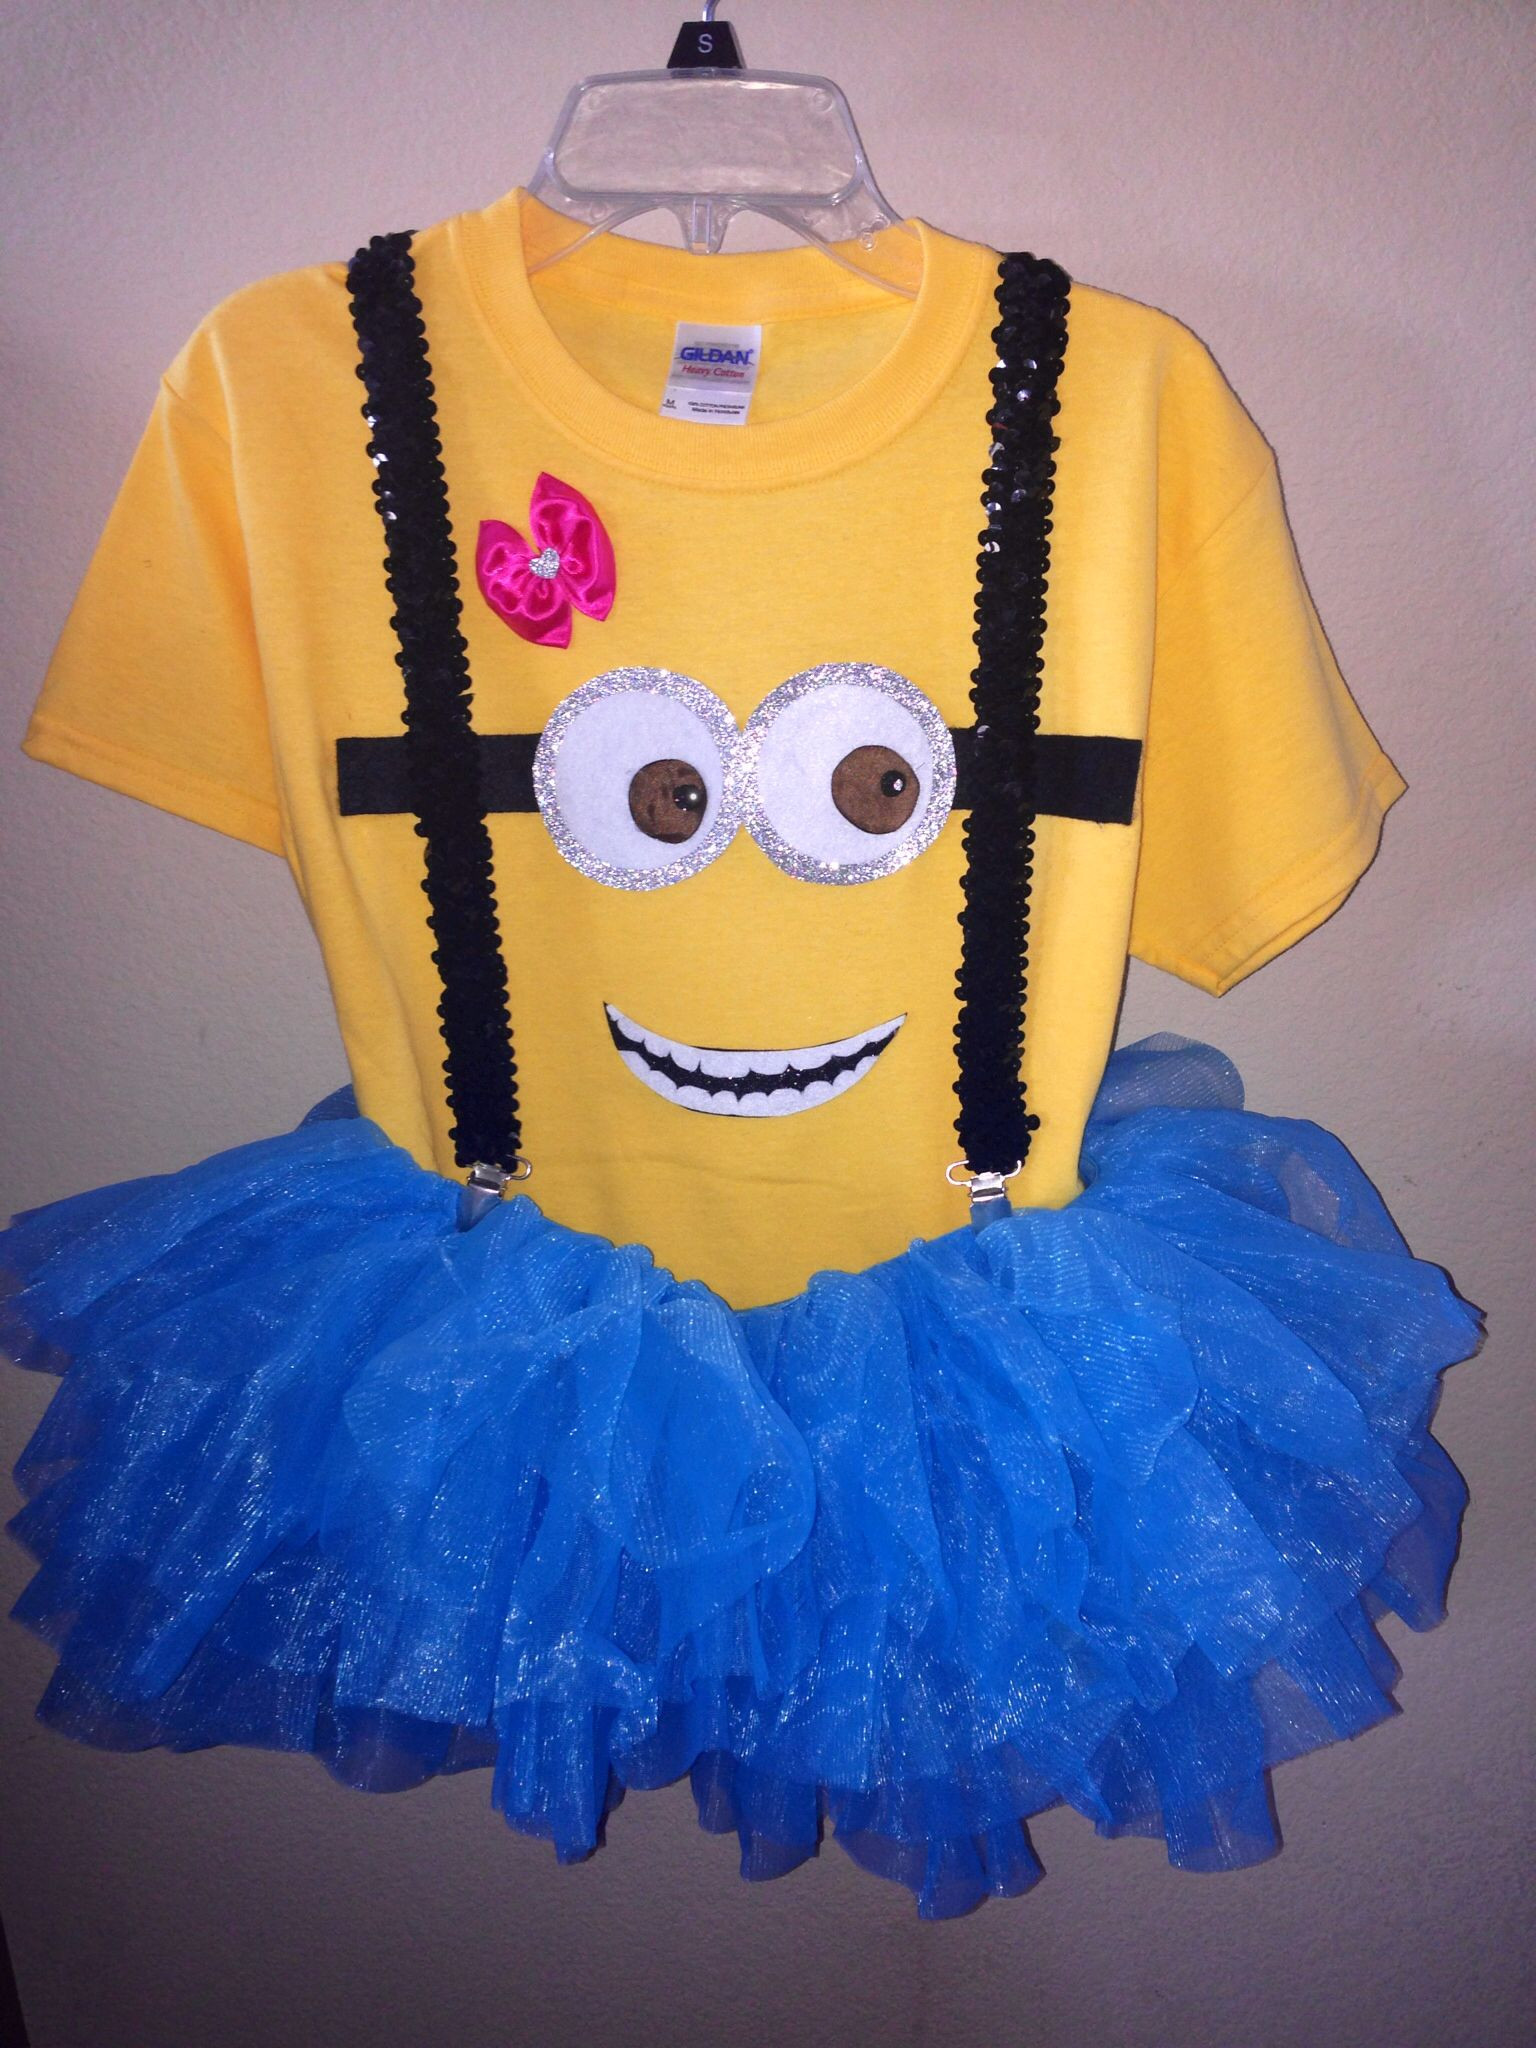 DIY Minion Costume For Kids
 Homemade minion costume For my Living Dolls